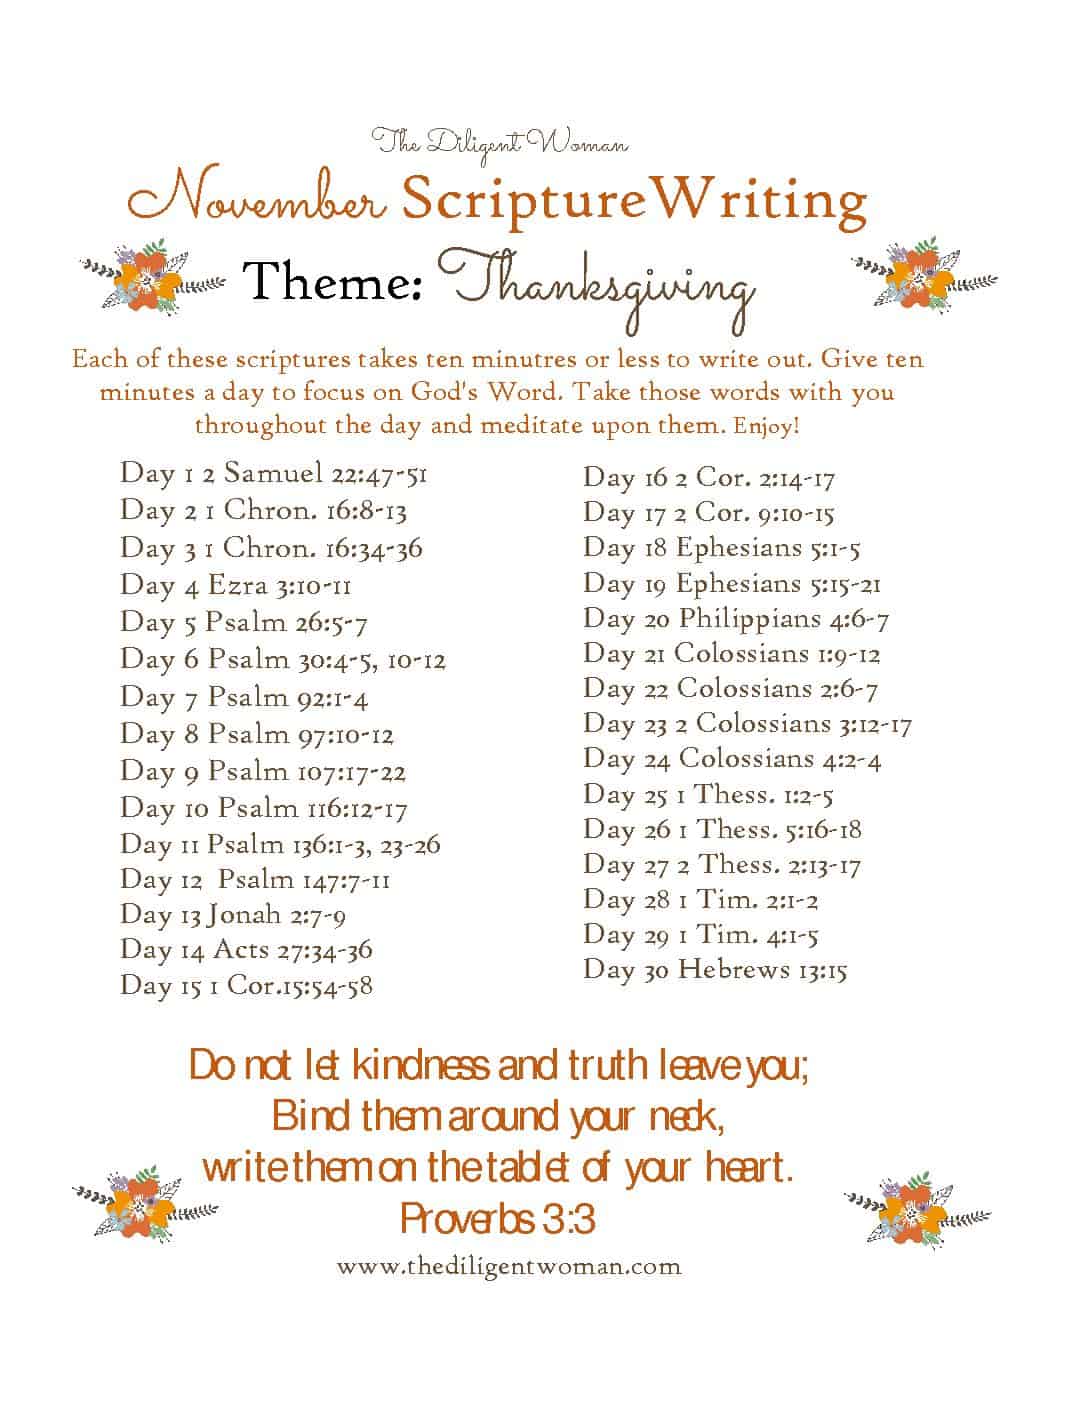 November Scripture Writing - Thanksgiving | The Diligent Woman